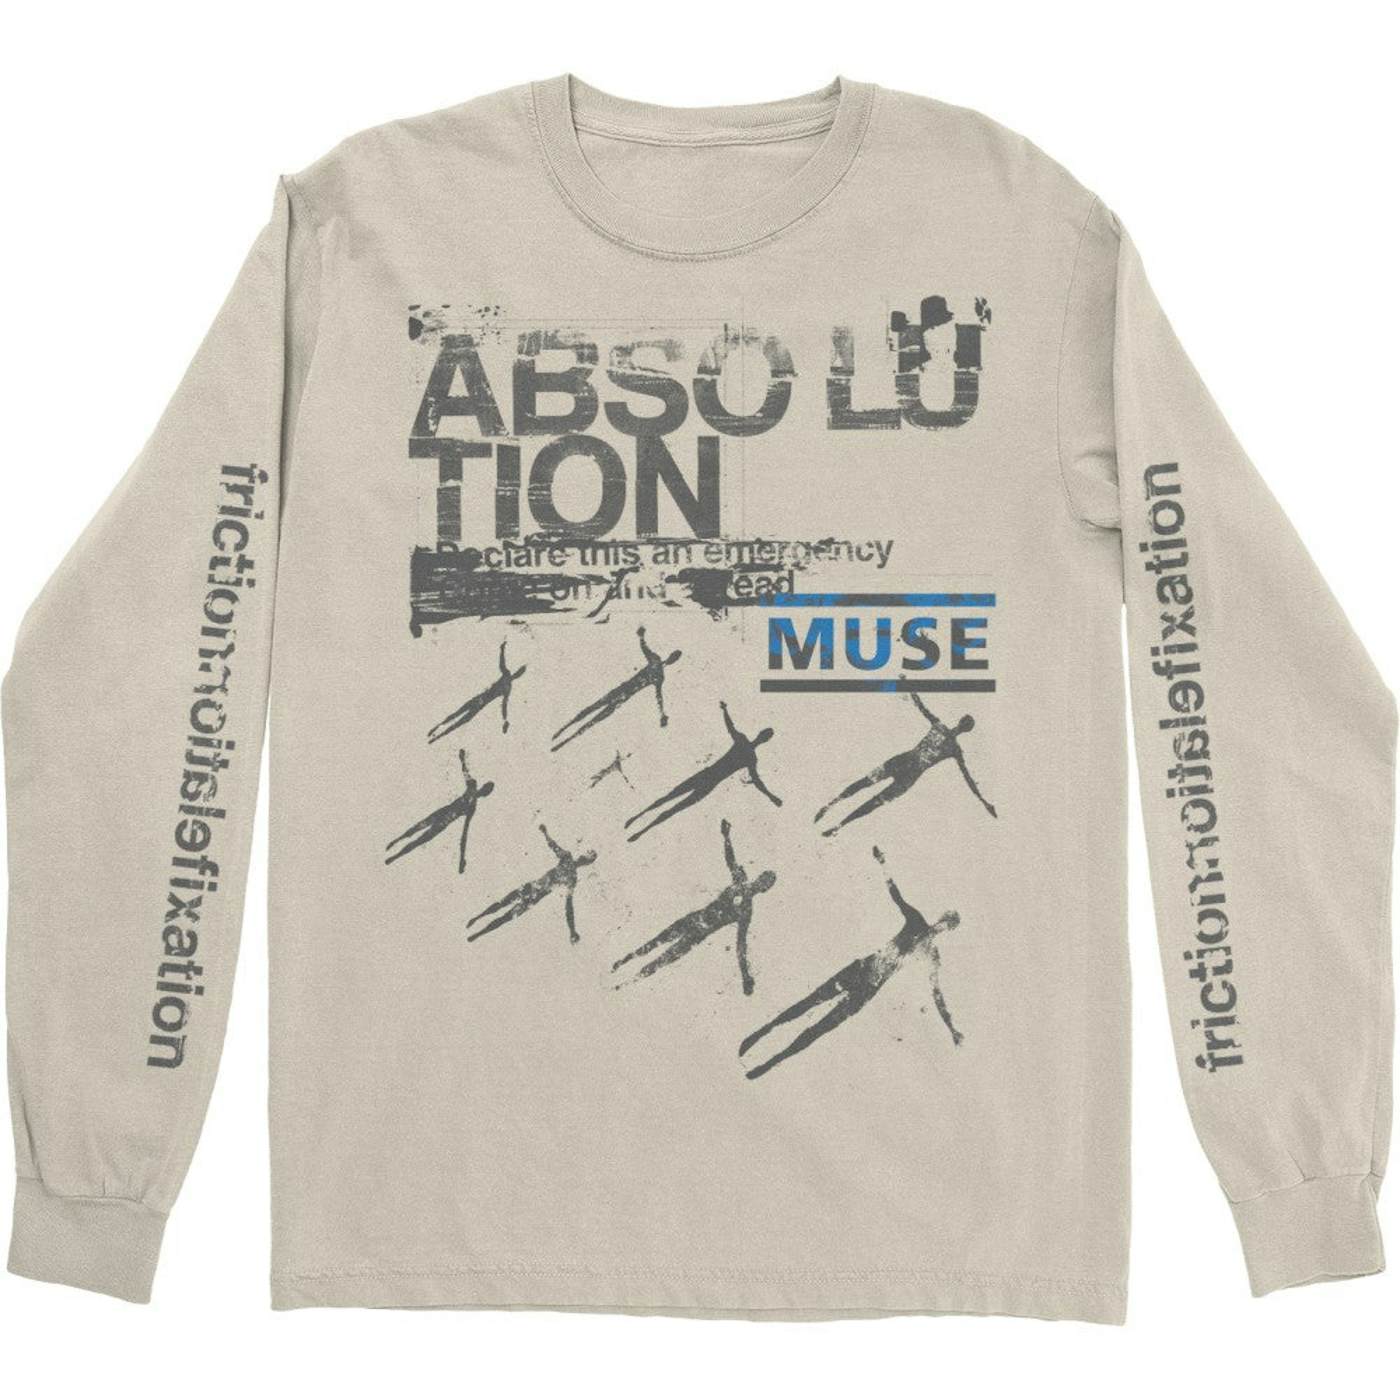 Muse Absolution XX Friction White Longsleeve T-Shirt